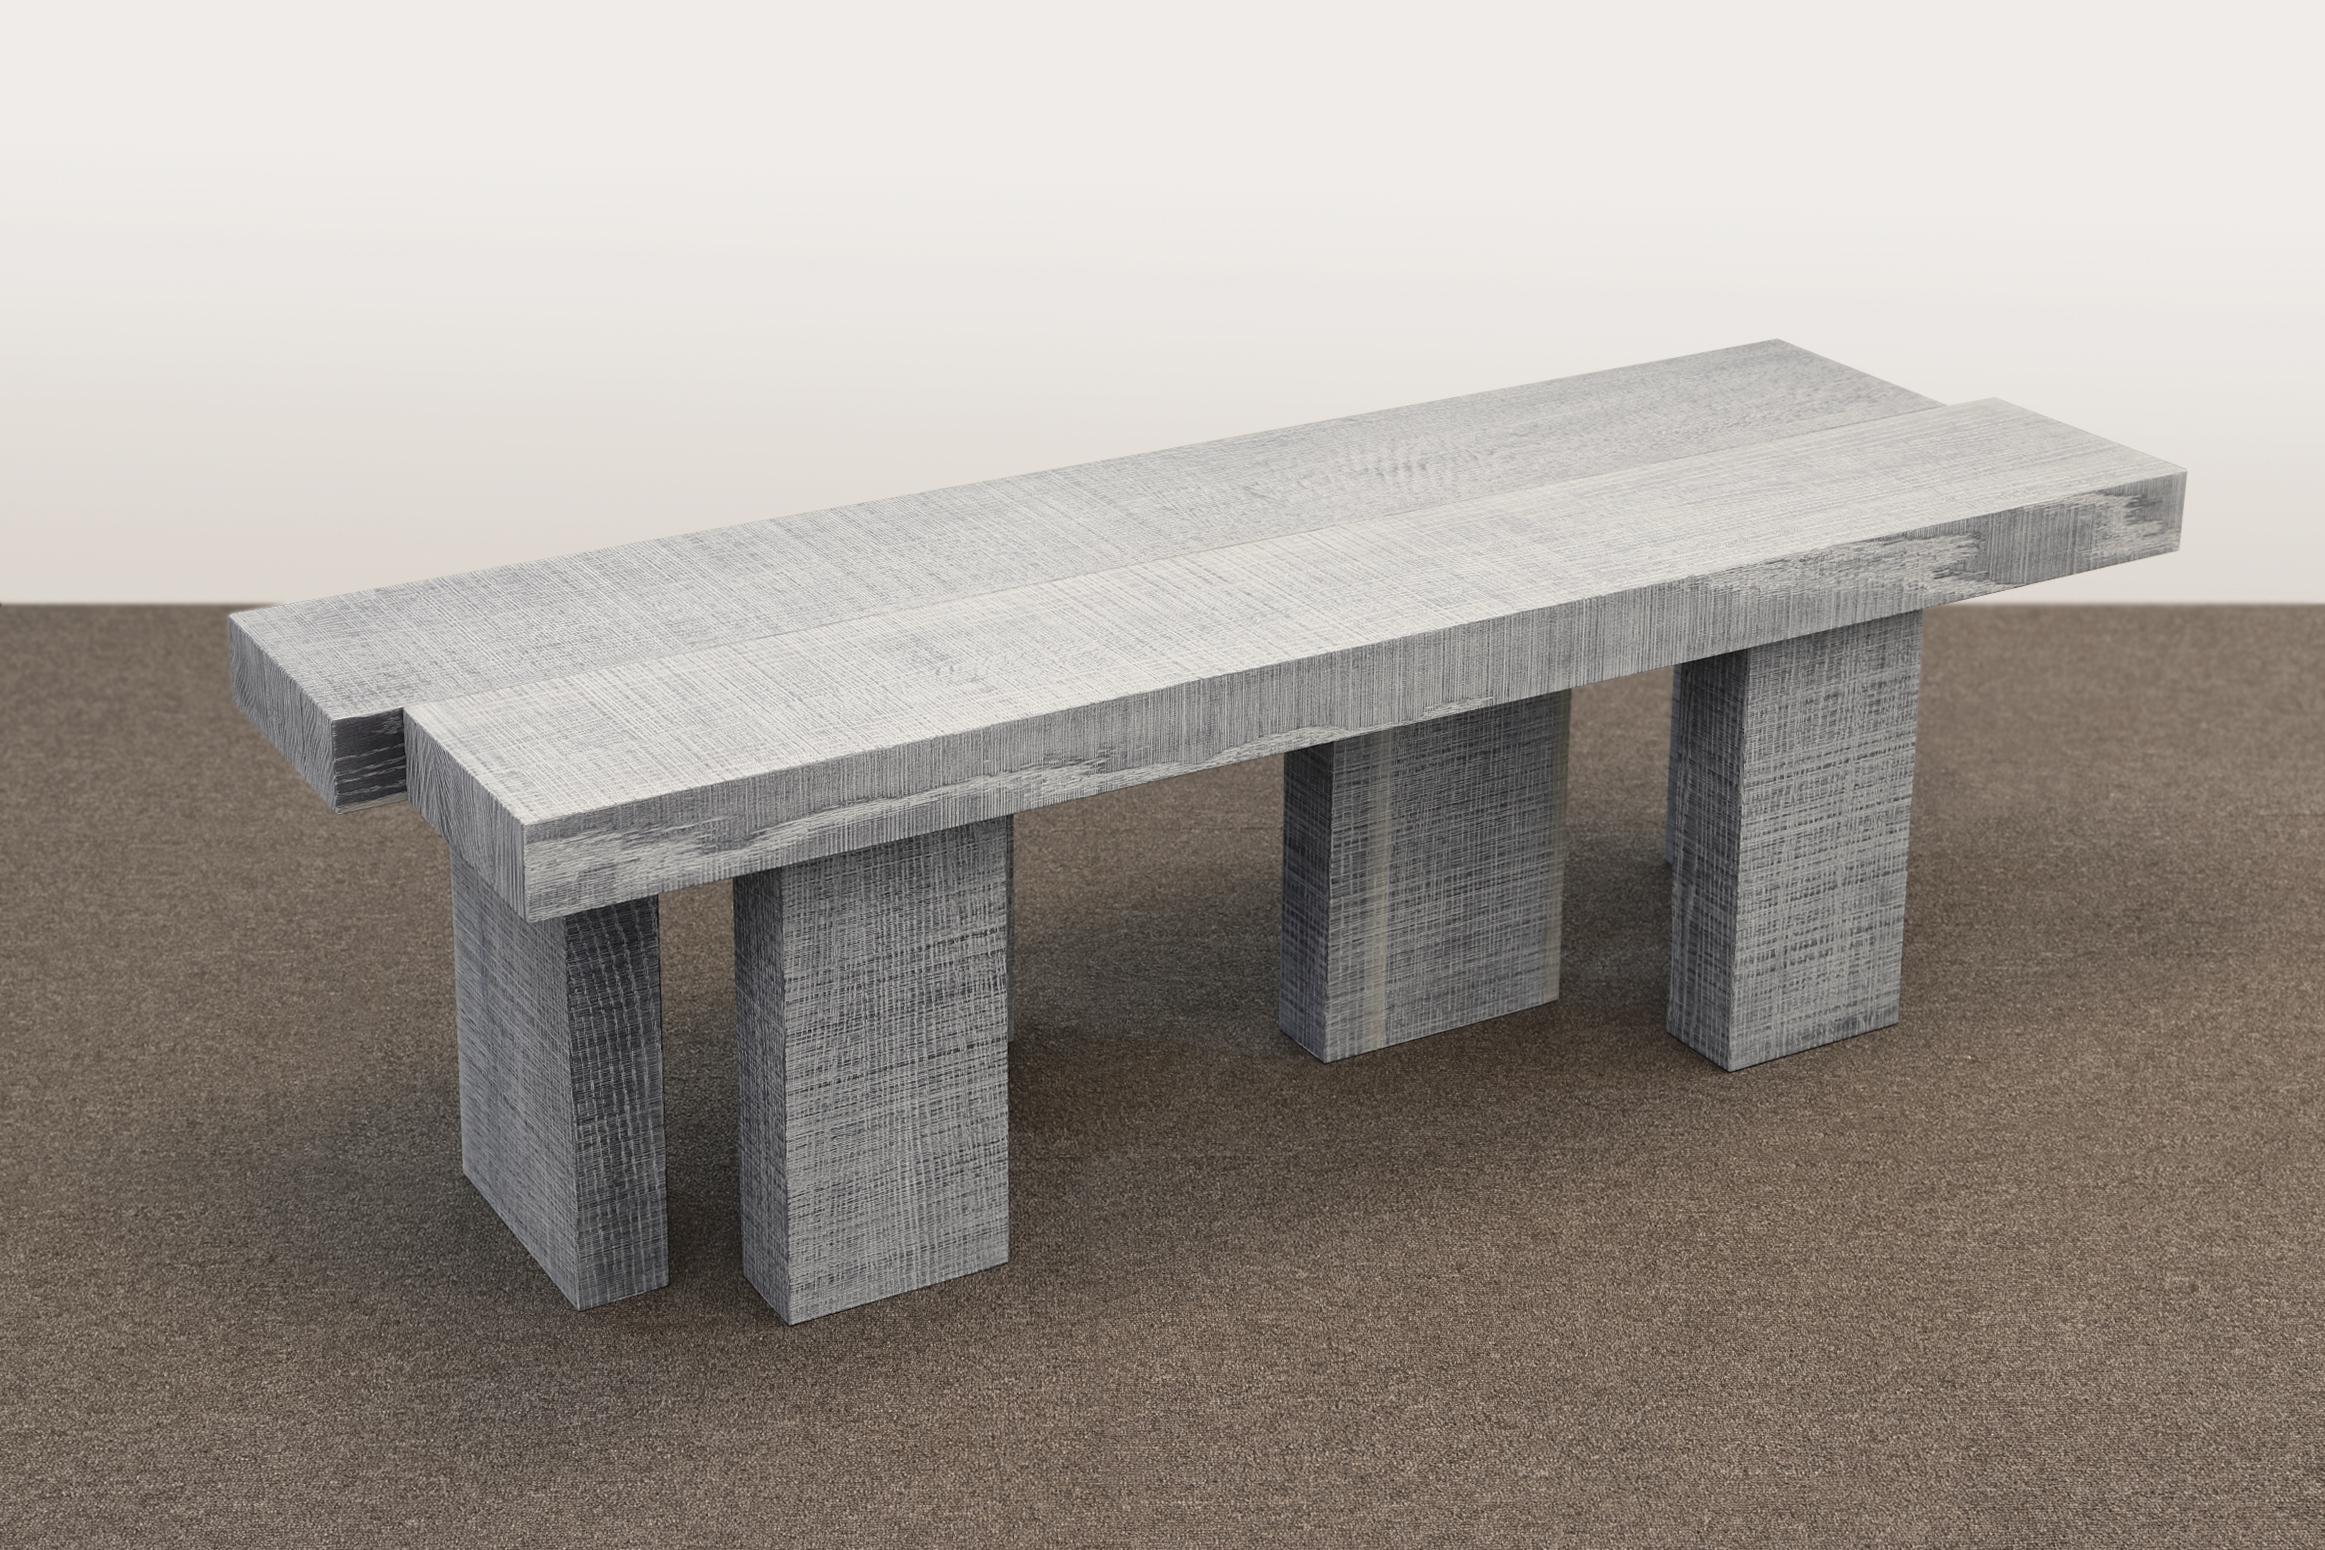 White Layered oak wood bench by Hyungshin Hwang
Dimensions: D 120 x W 36 x H 42 cm
Materials: oxidized red oak

Layered Series is the main theme and concept of work of Hwang, who continues his experiment which is based on architectural